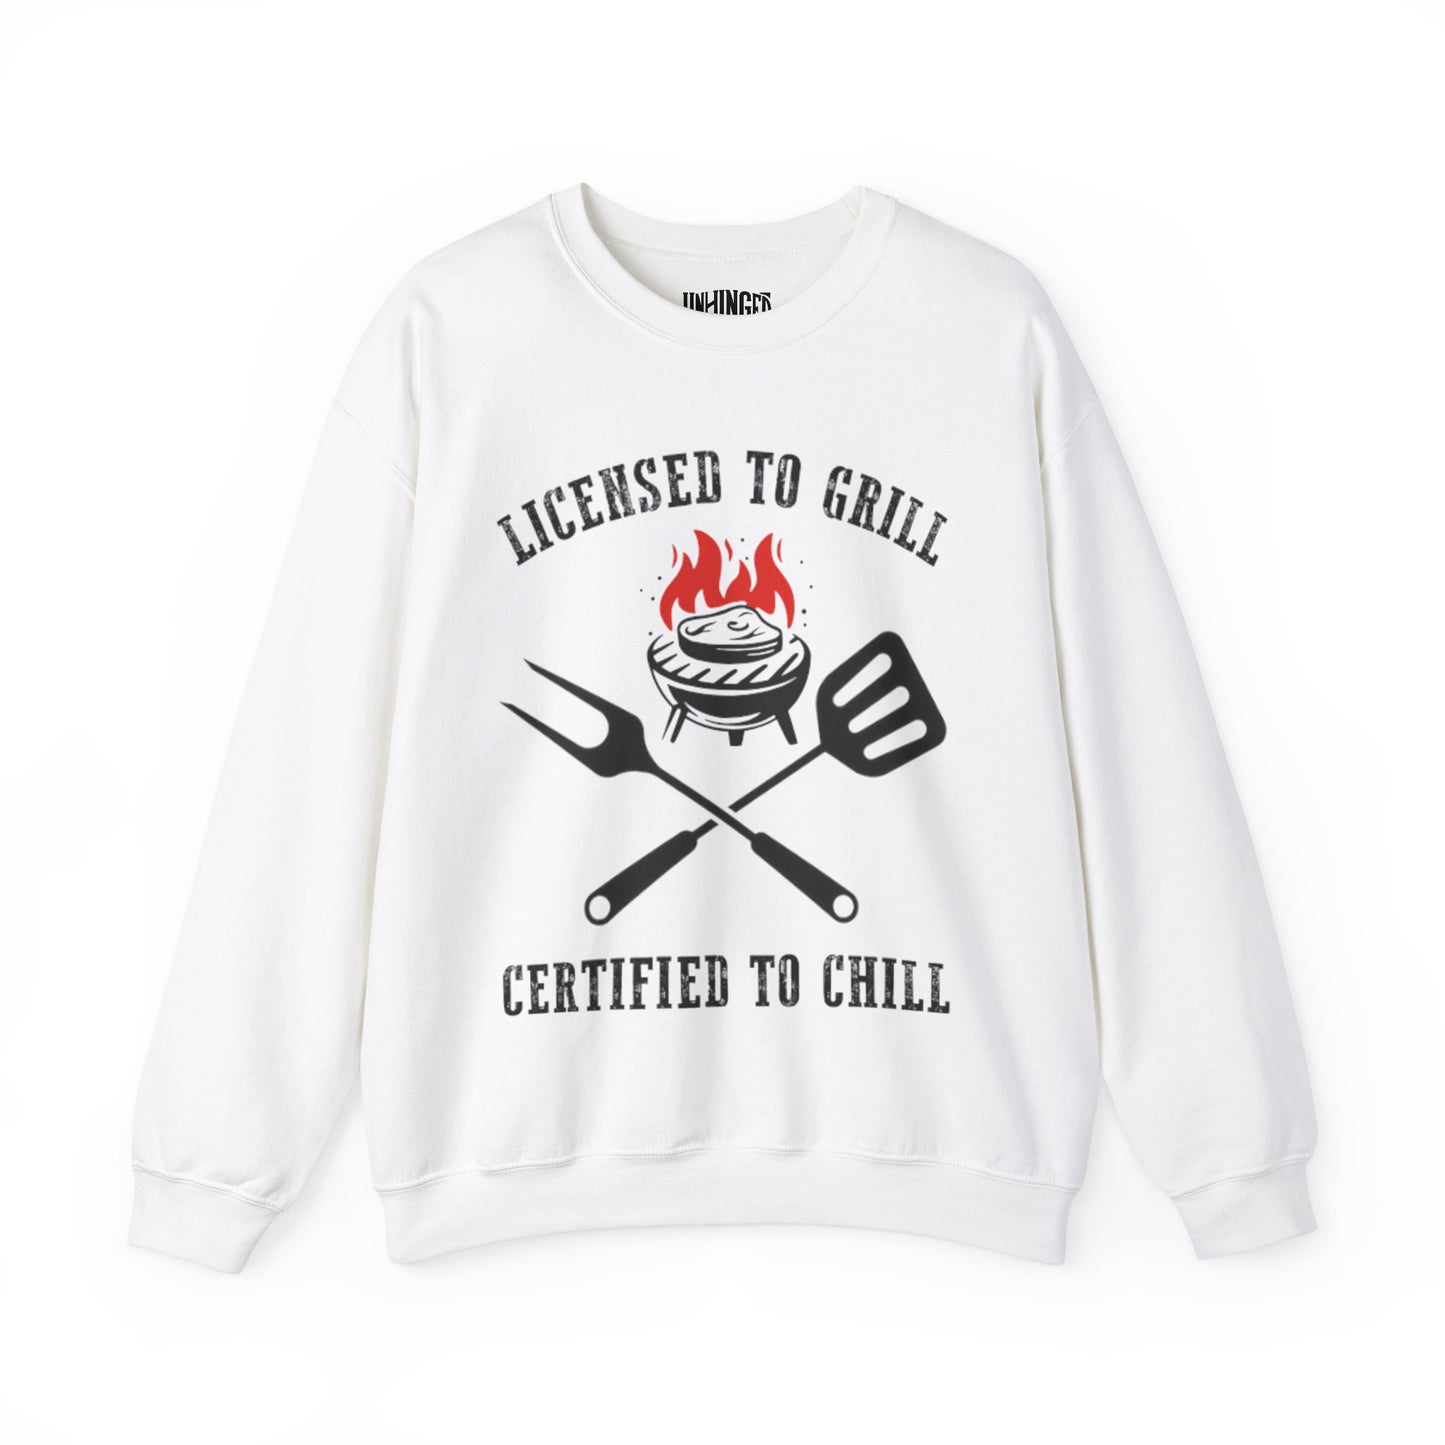 Licensed to Grill Certified to Chill™ Crewneck Sweatshirt